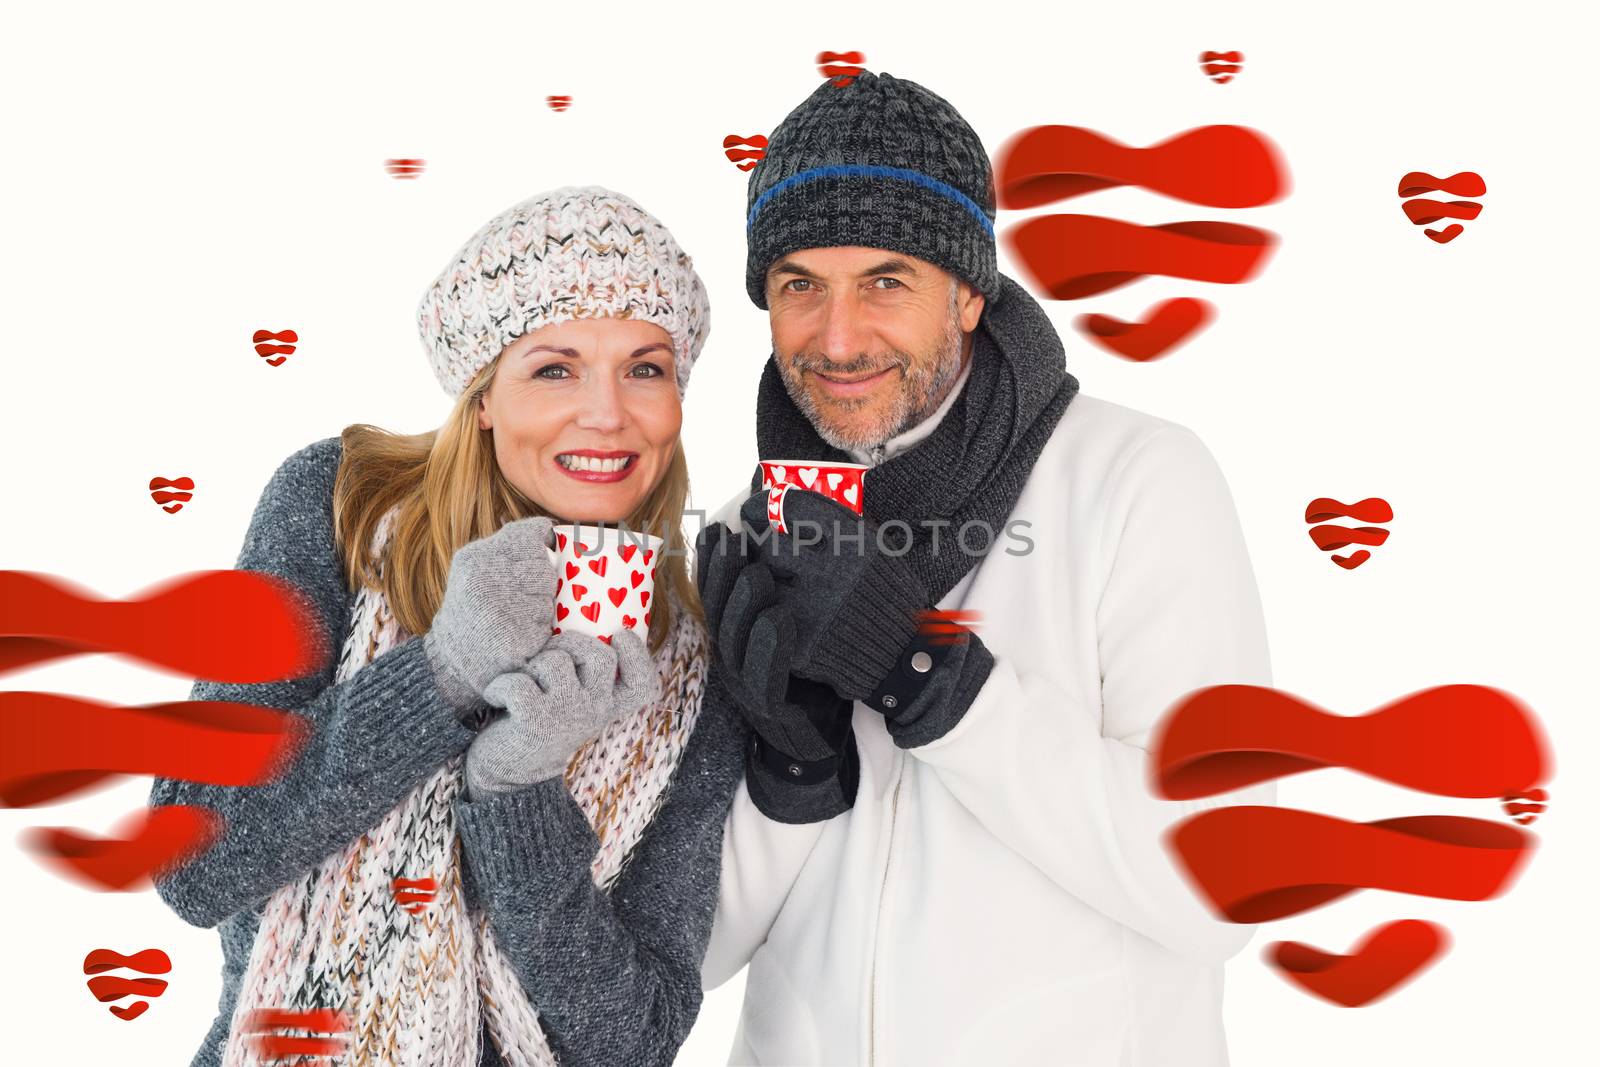 Happy couple in winter fashion holding mugs against hearts